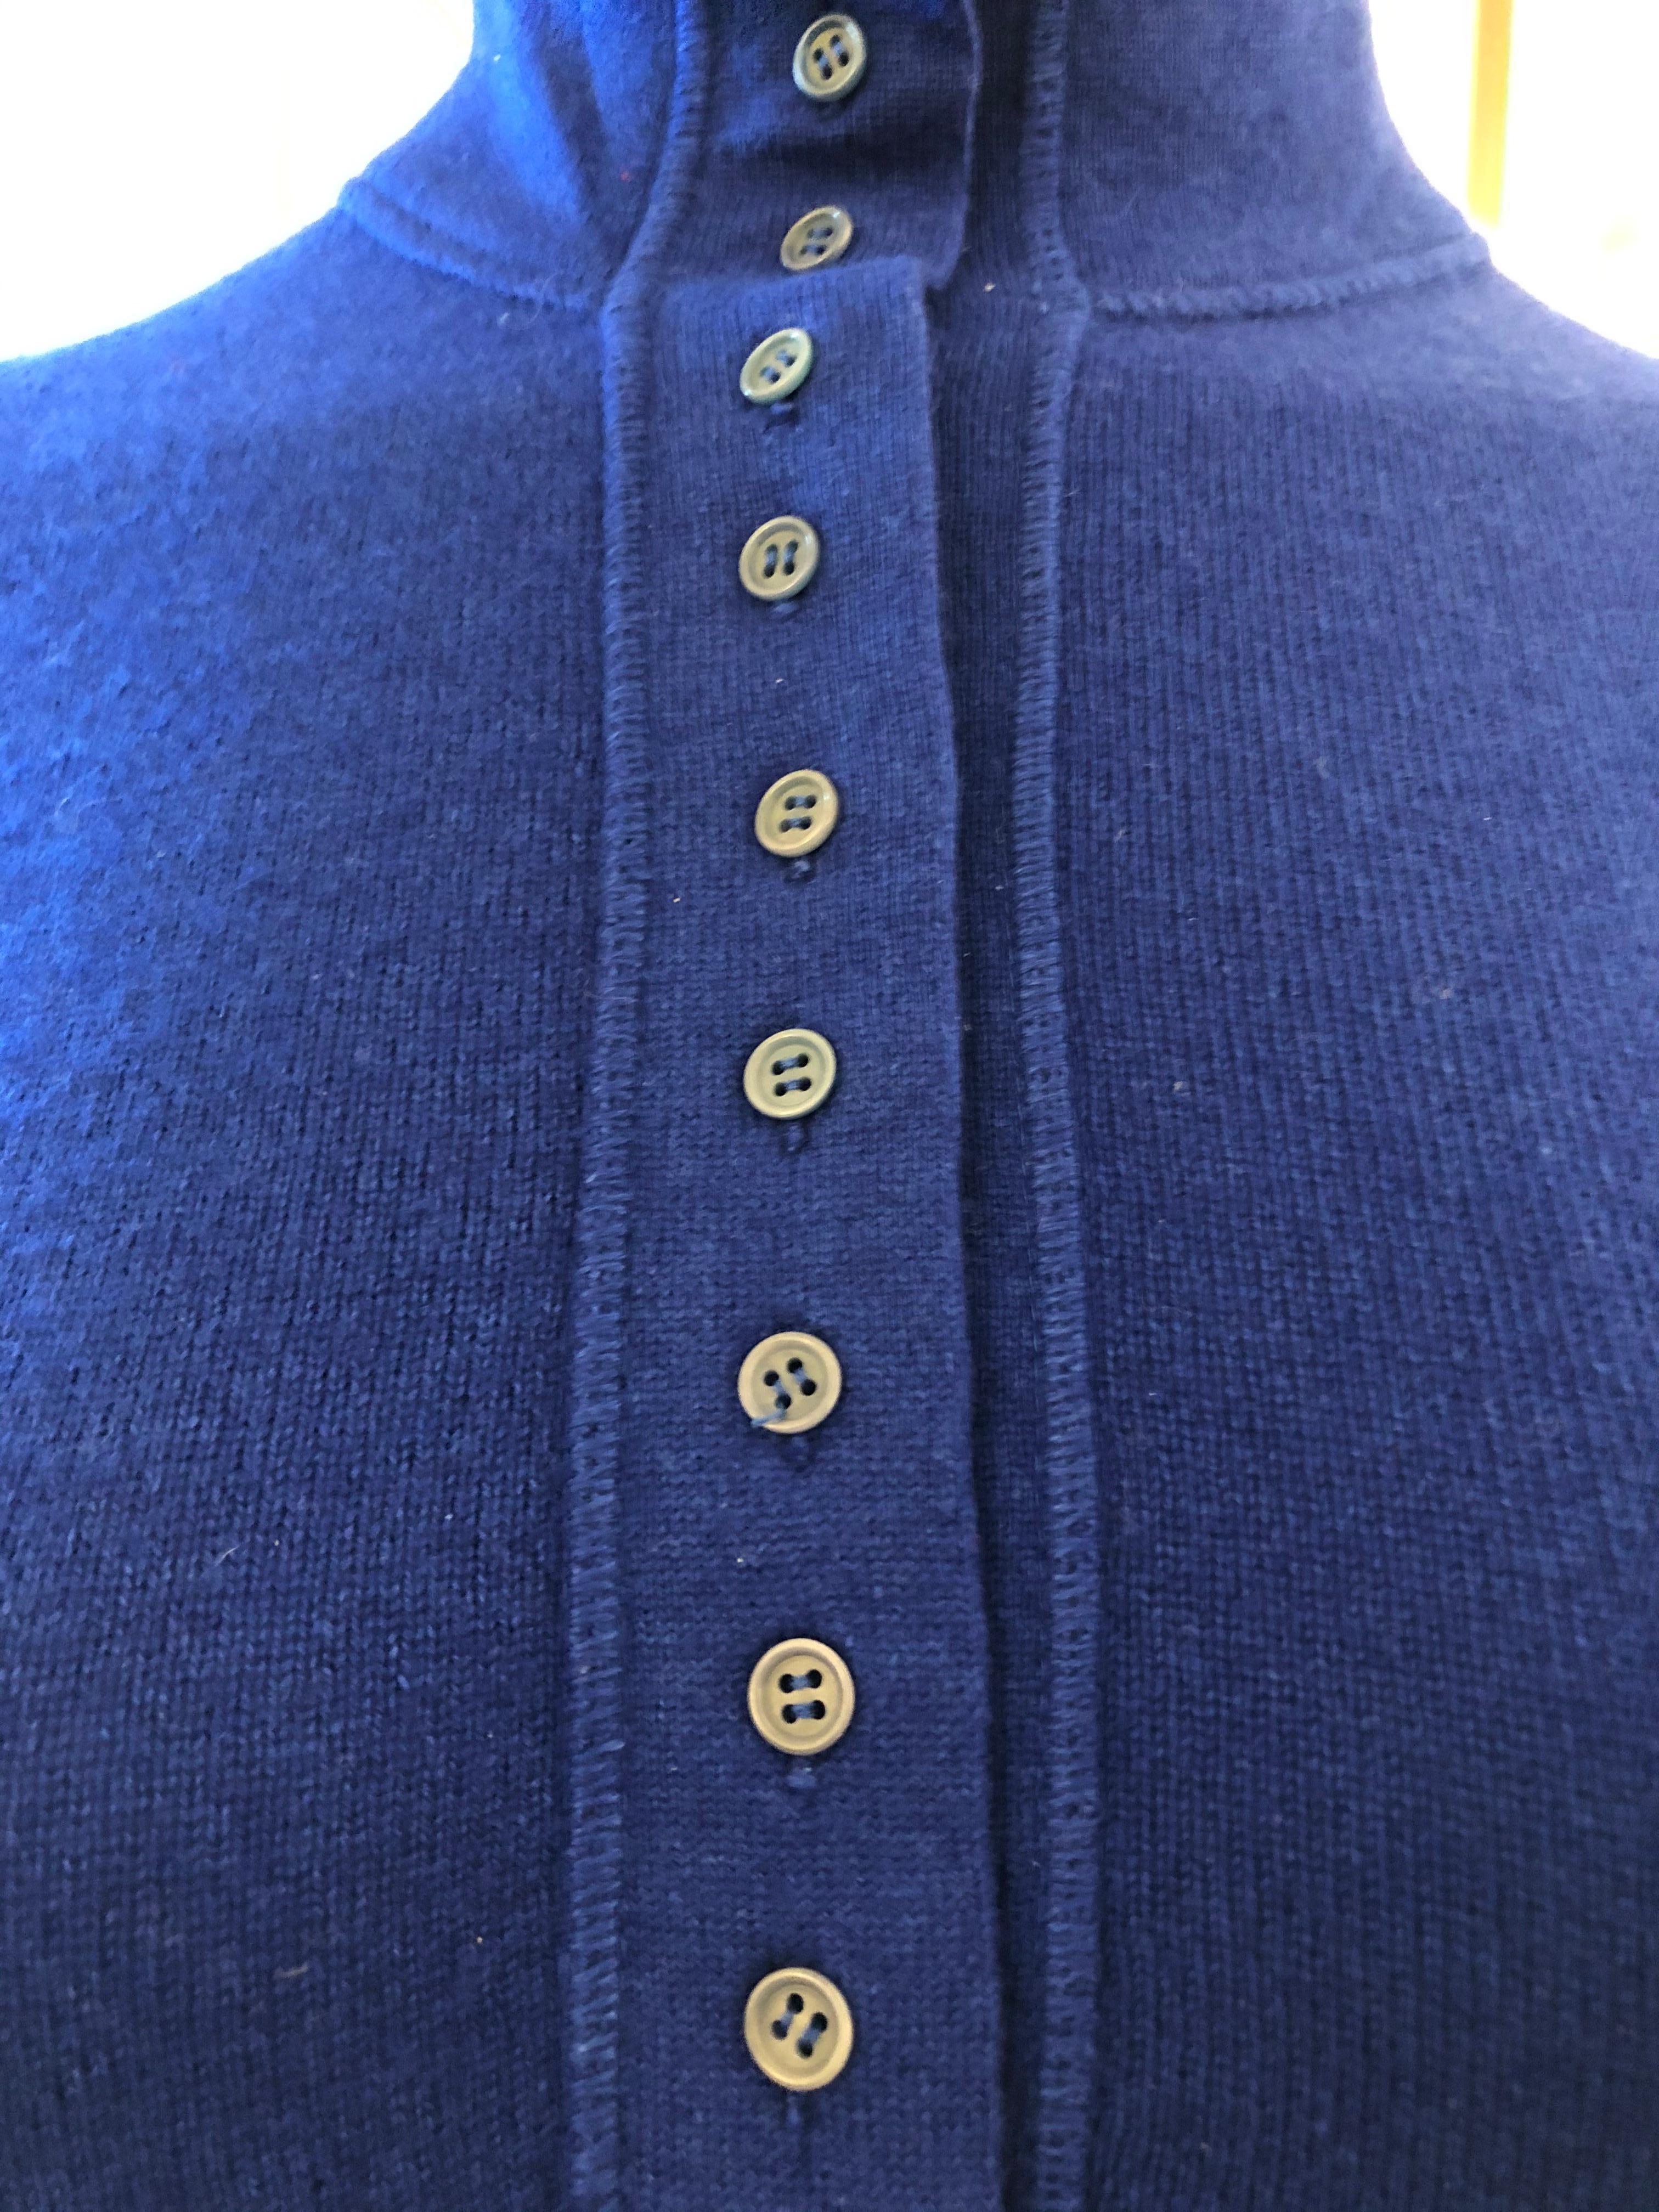 Wear it up or wear it down, this is a beautifully made sweater of the finest quality. The high neckline can be folded as in the pictures and the buttons can accommodate your style. The hems are ribbed and there are exposed seams.